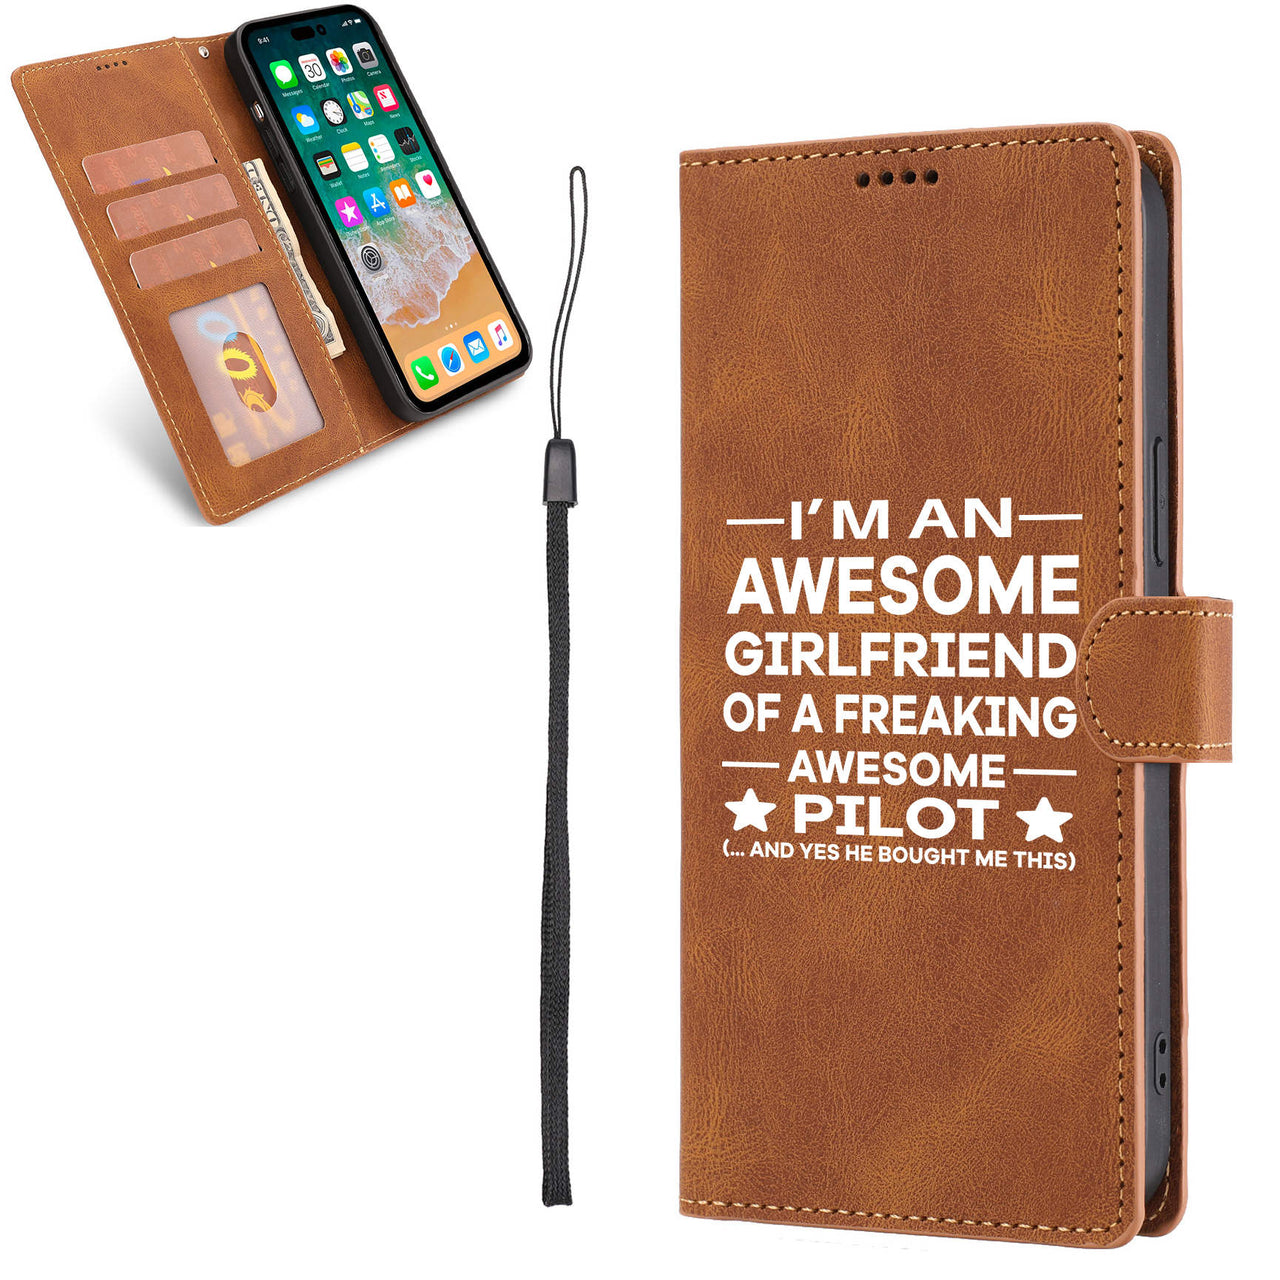 I am an Awesome Girlfriend Designed Leather iPhone Cases